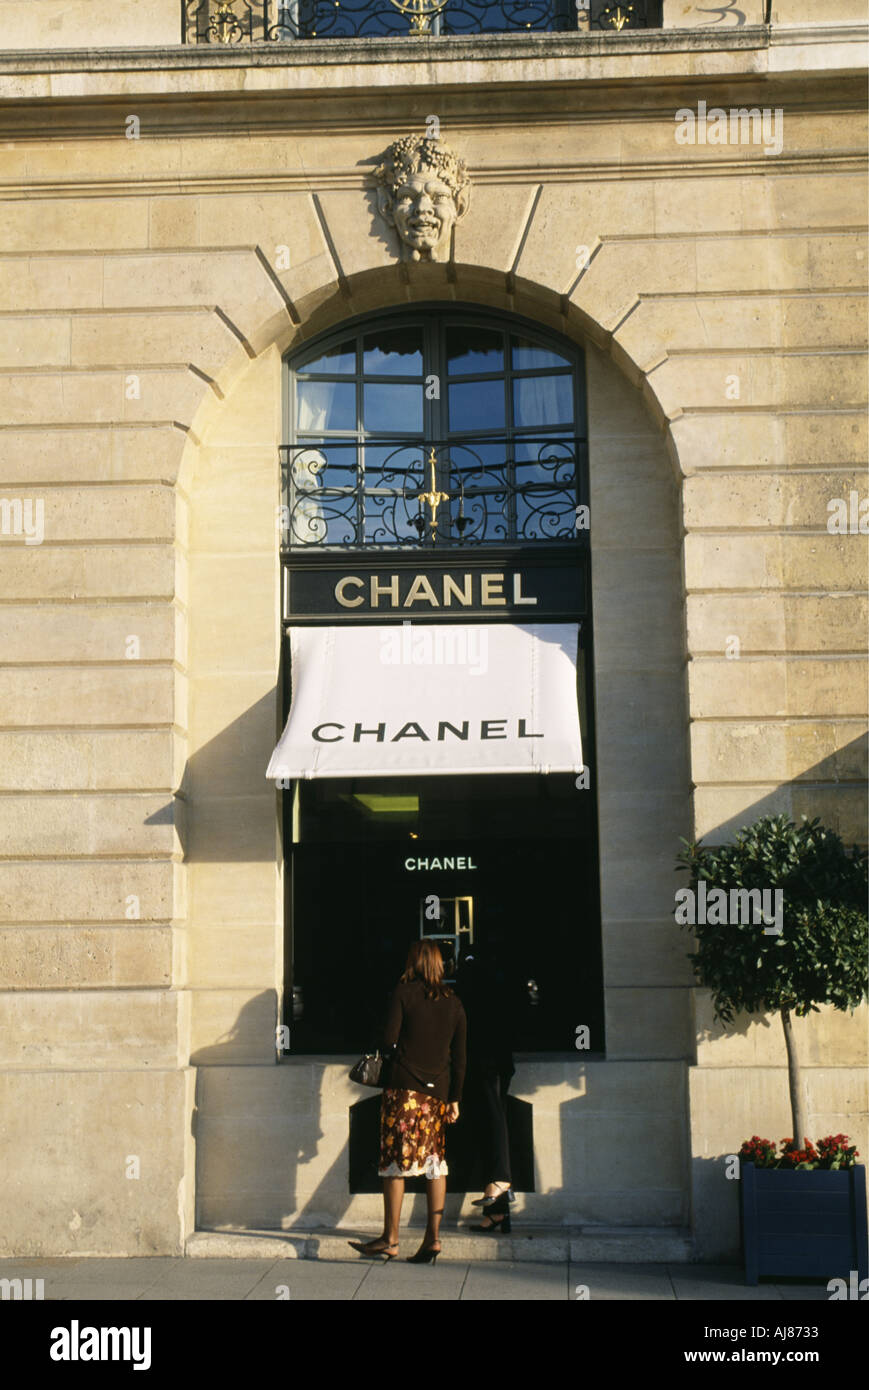 A NEW CHANEL STORE ON RUE CAMBON